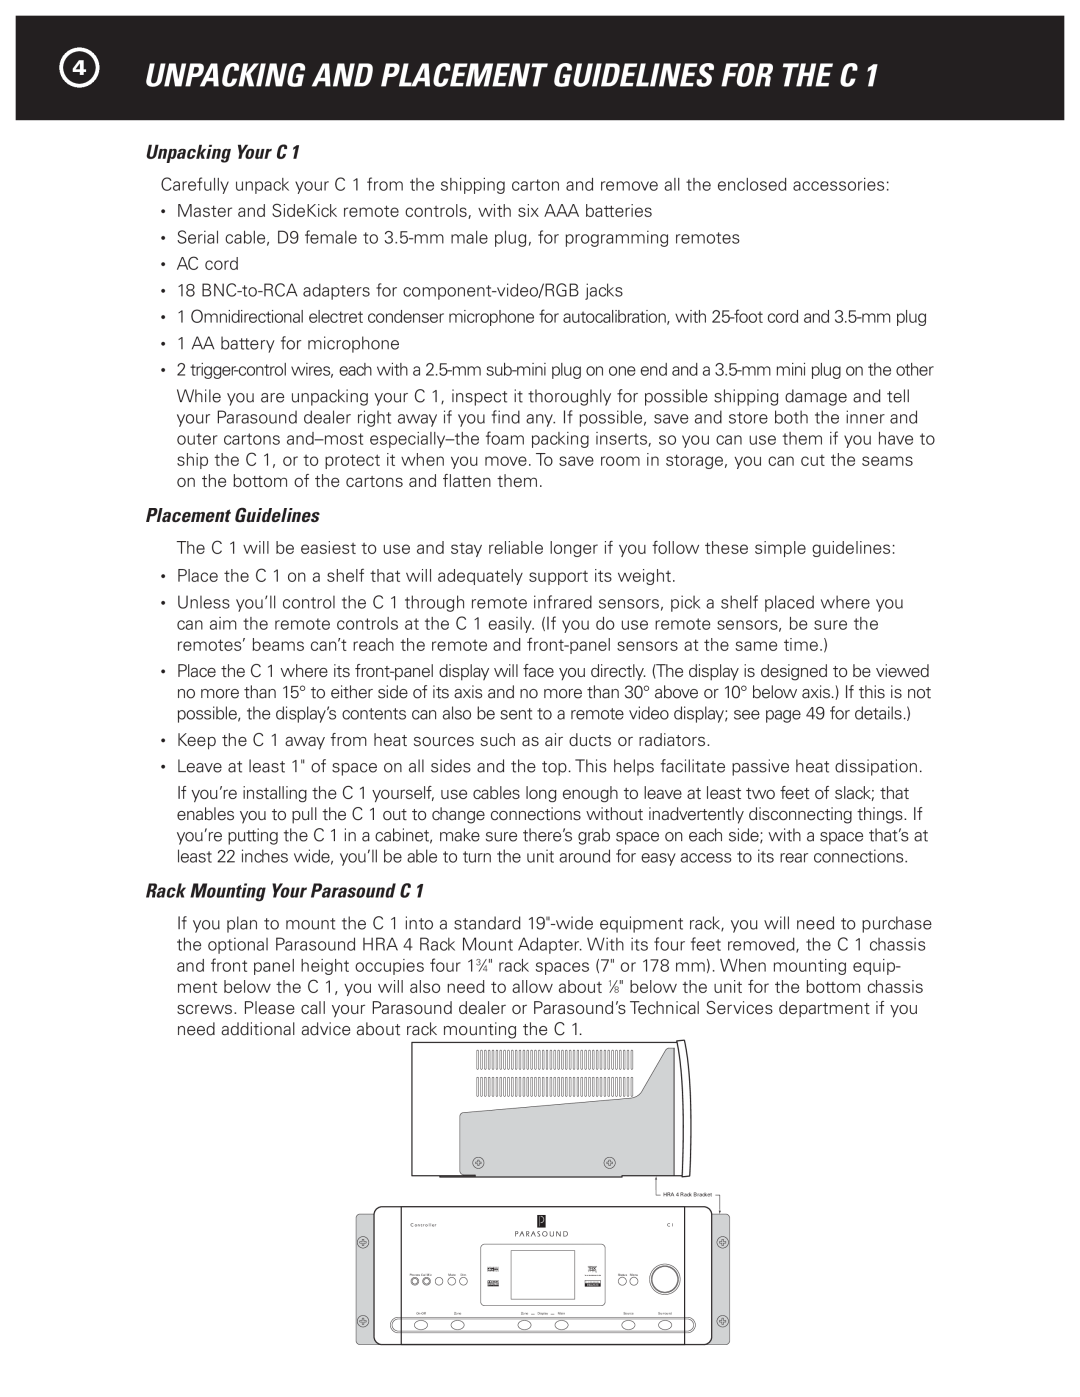 Parasound Halo C1 Controller manual 4UNPACKING AND PLACEMENT GUIDELINES FOR THE C, Unpacking Your C, Placement Guidelines 